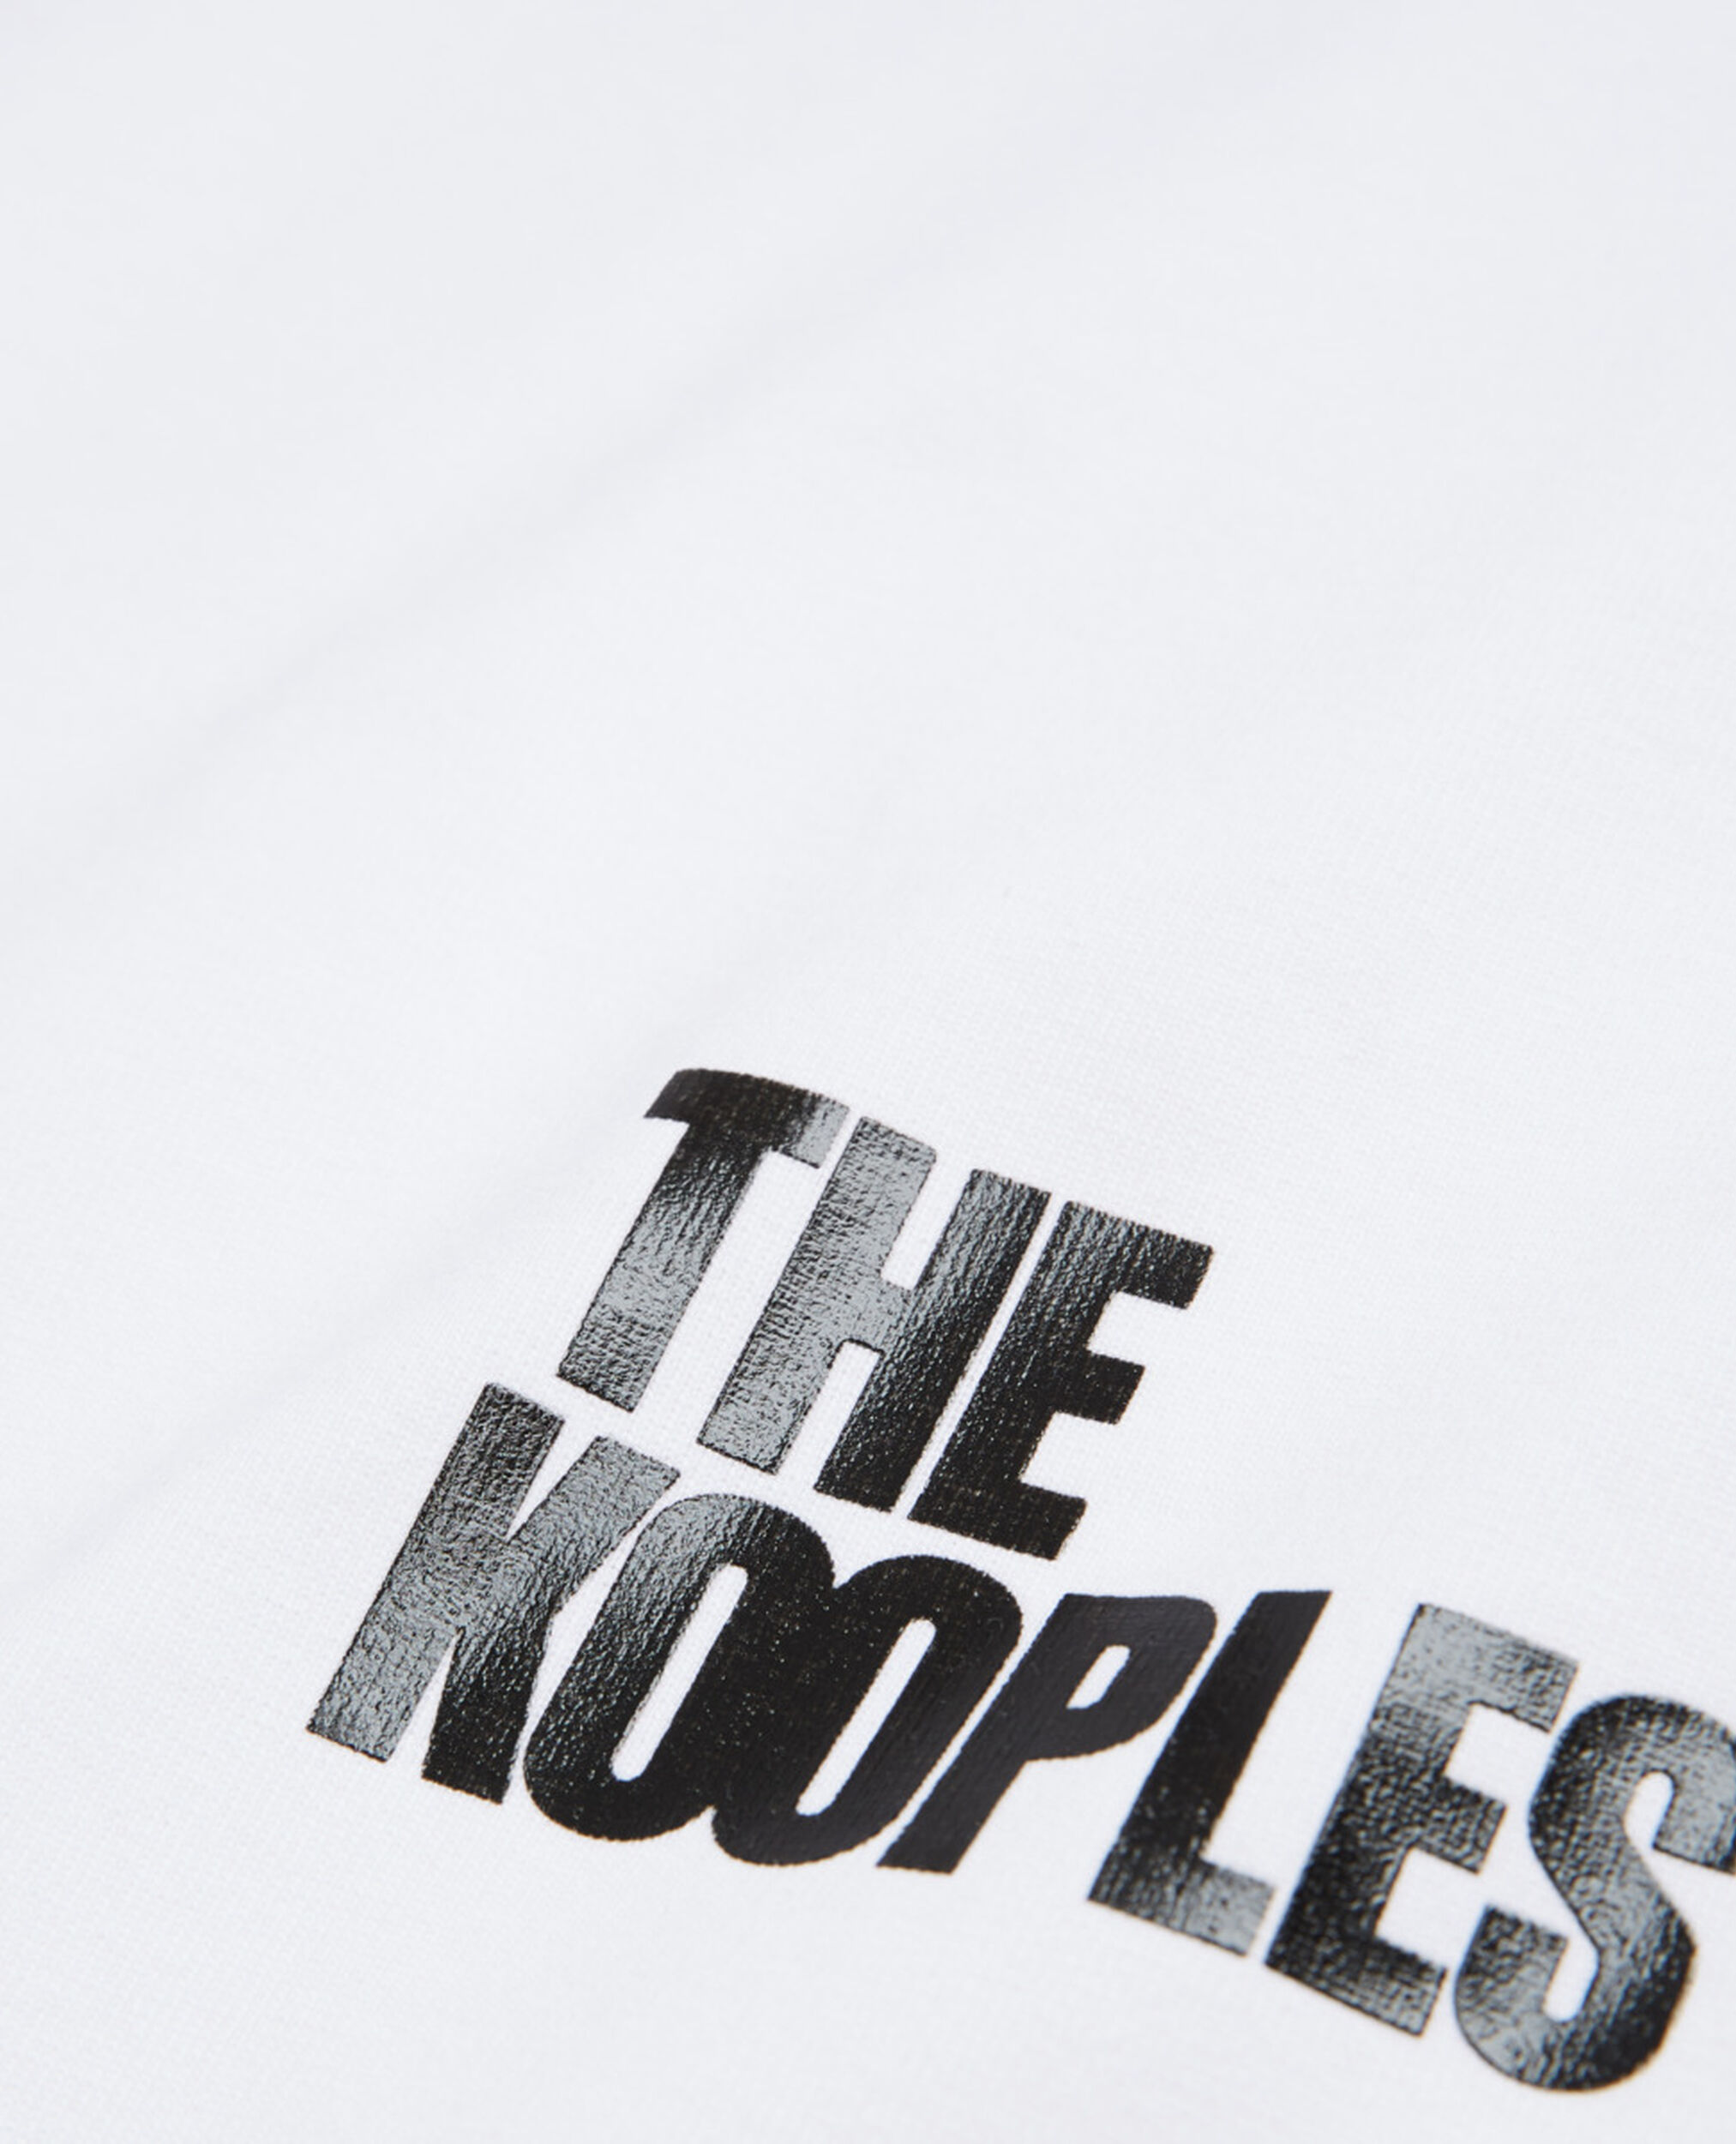 The Kooples white logo T-shirt, SNOW WHITE, hi-res image number null